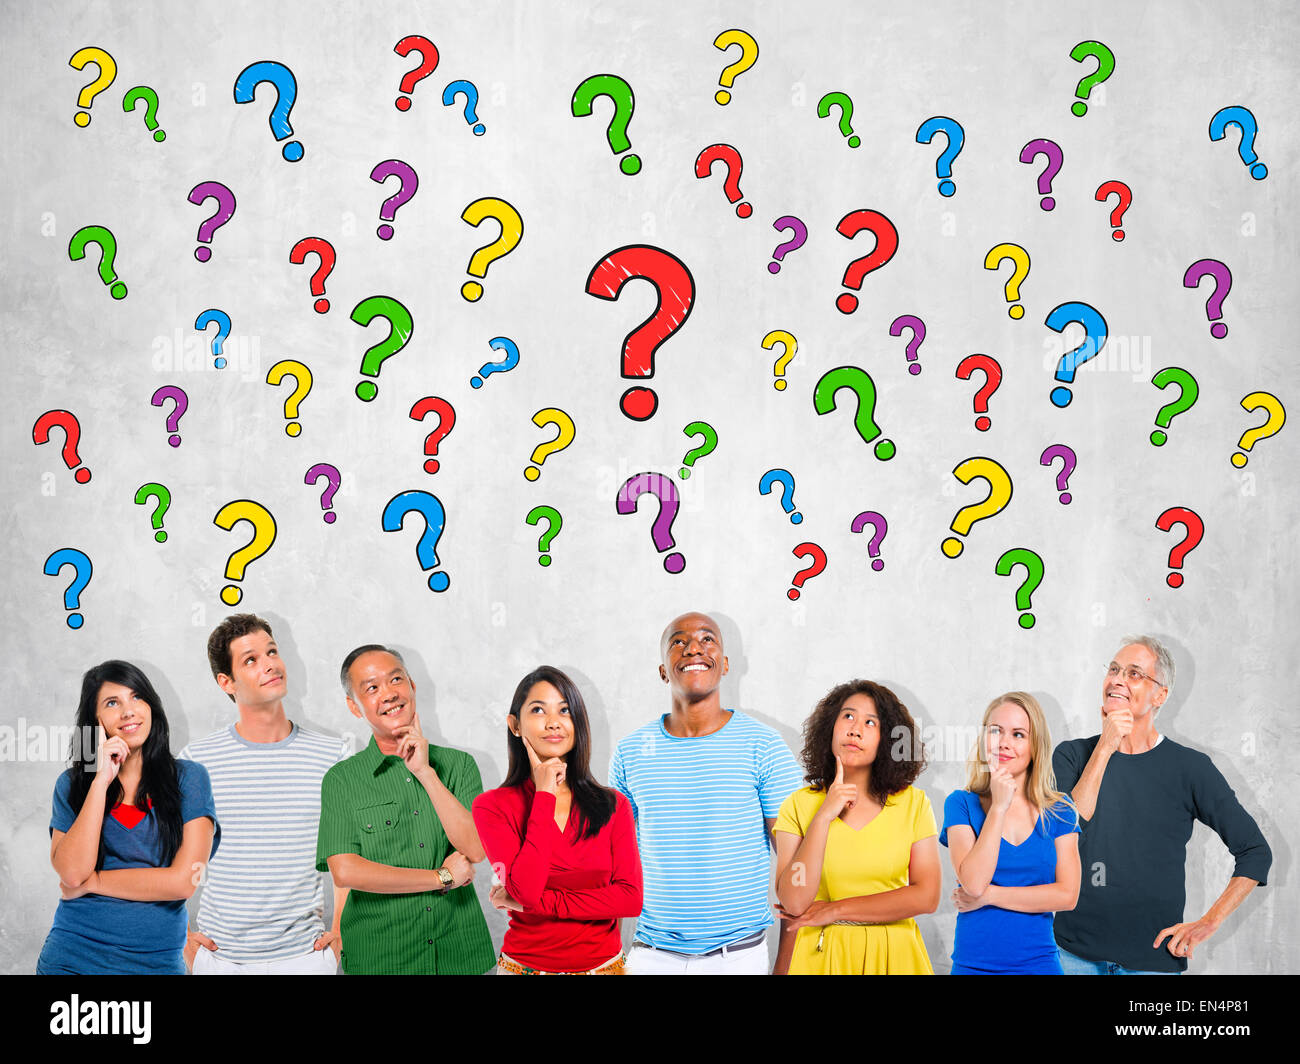 Multi Ethnic Group Of People Thinking And Question Marks Stock Photo Alamy